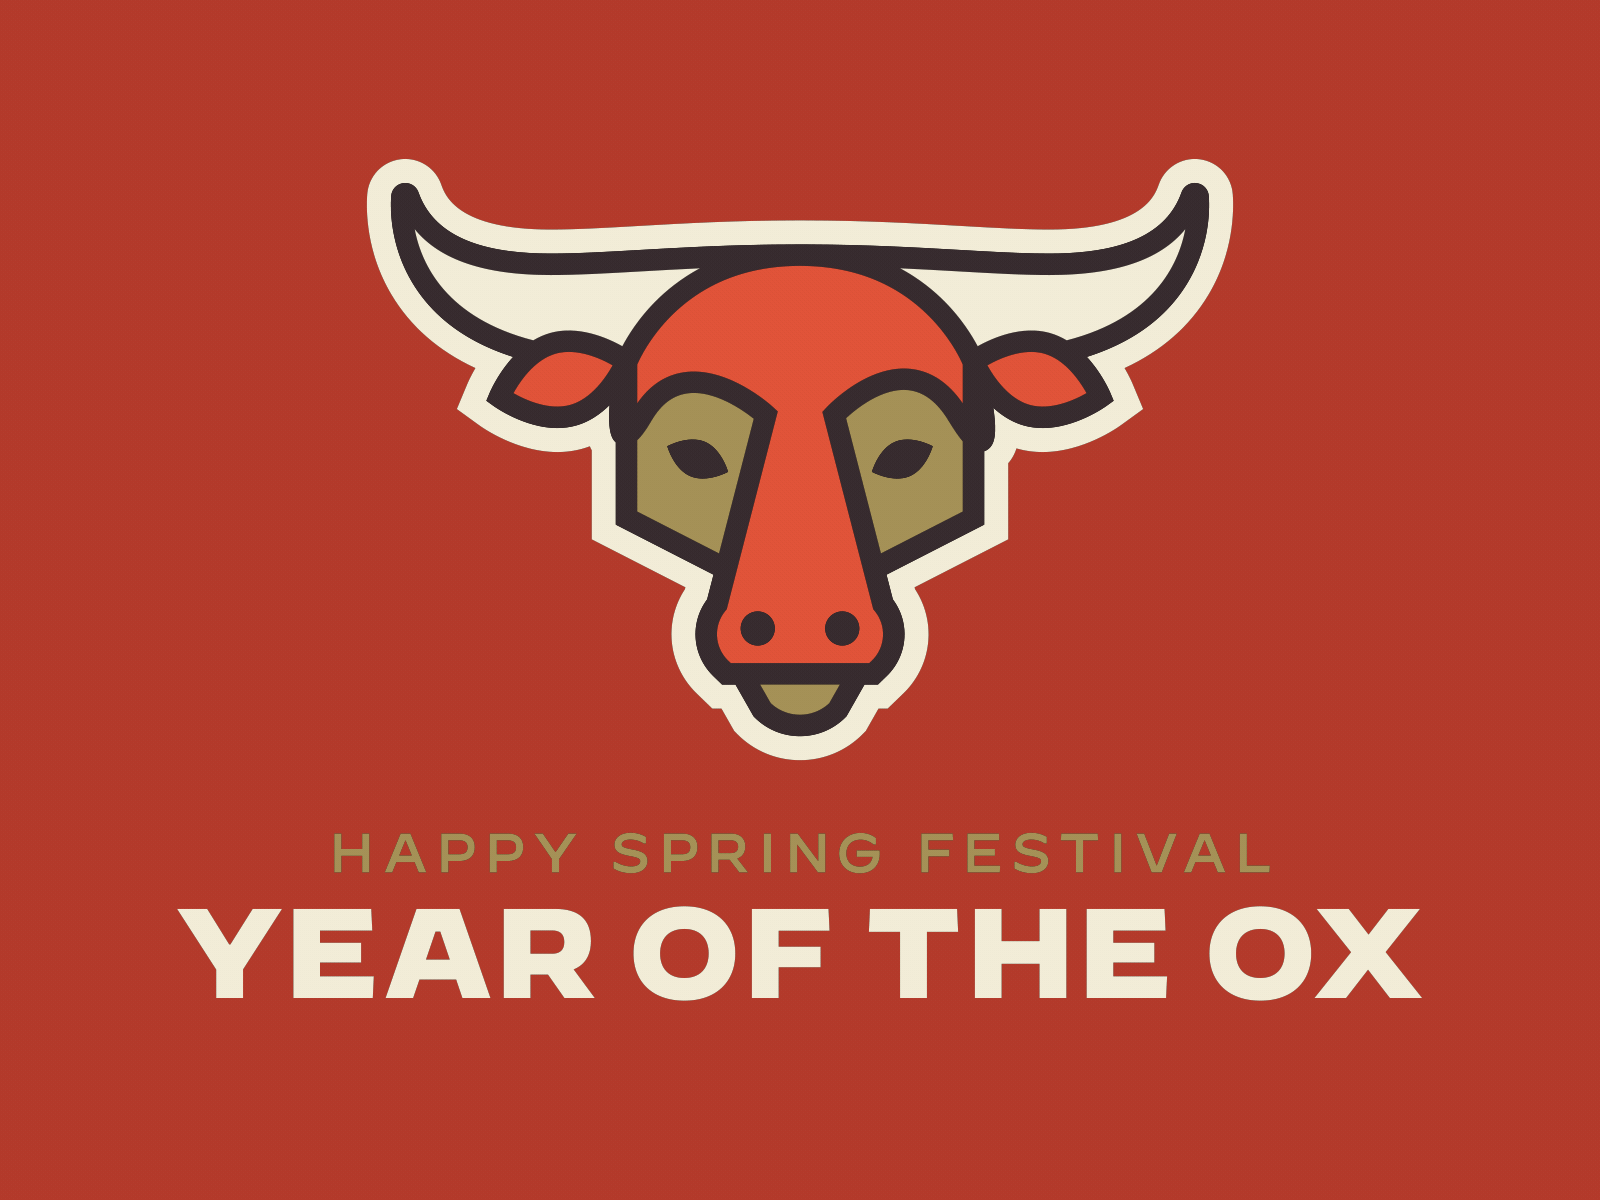 Happy Spring Festival! Year of the Ox!